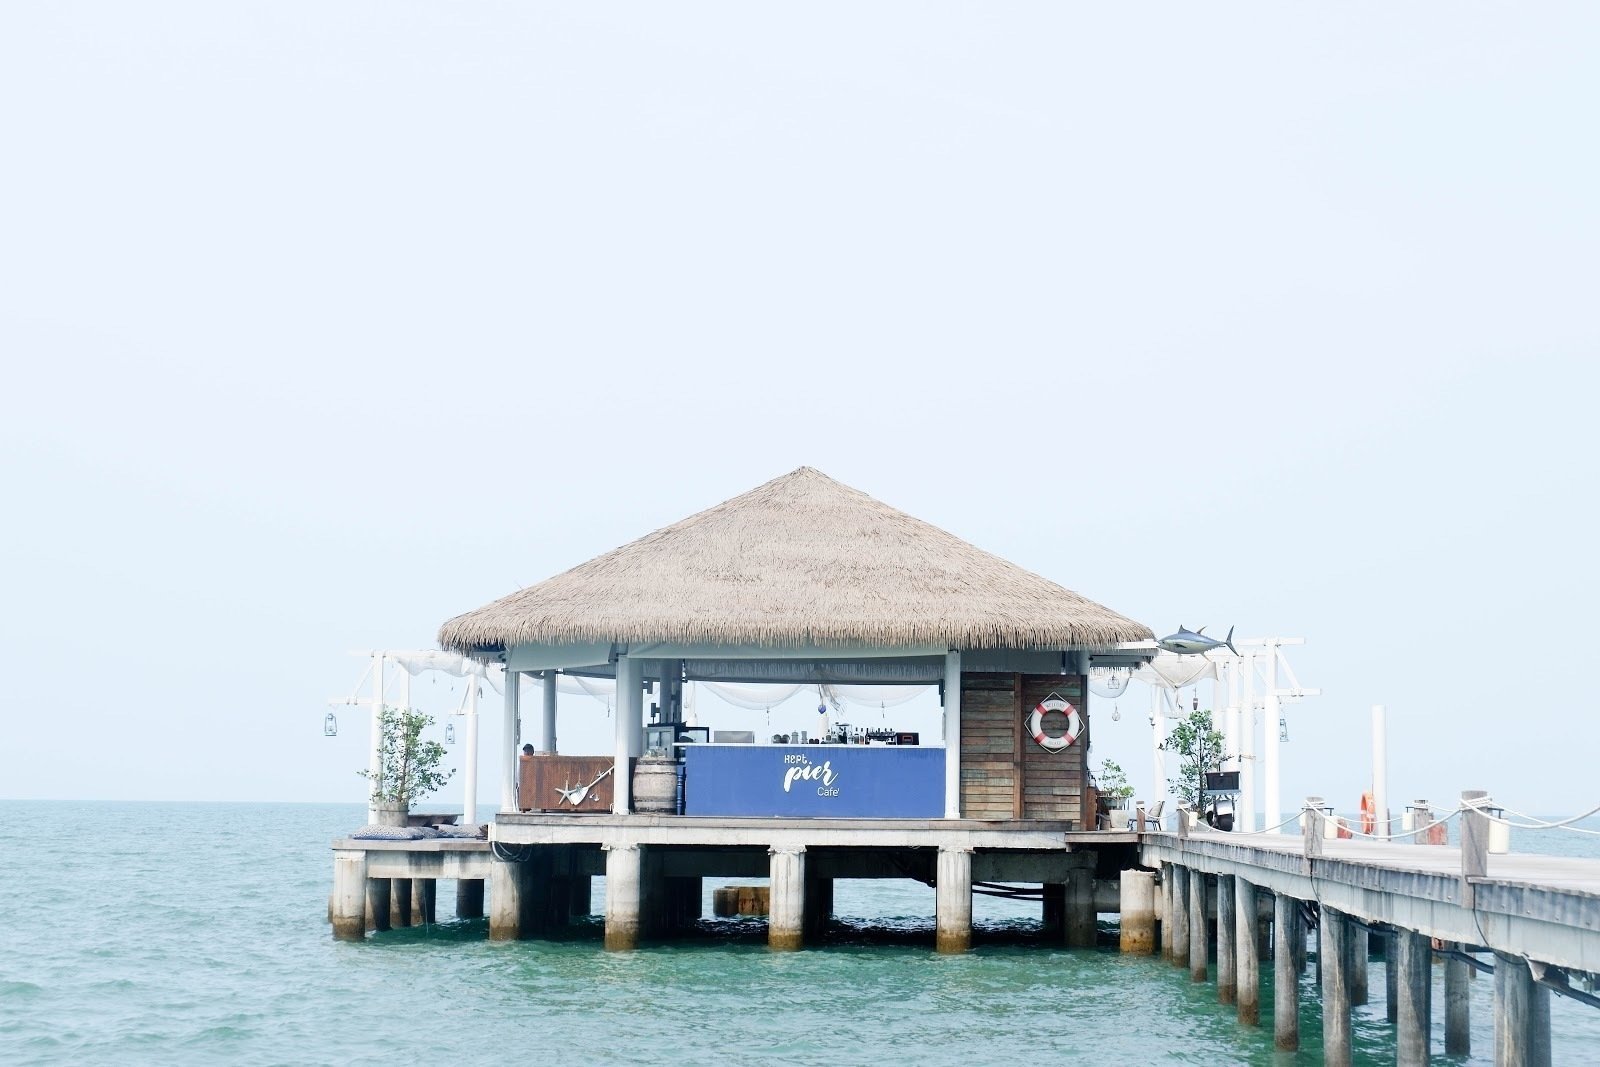 <span class="translation_missing" title="translation missing: en.meta.location_title, location_name: Kept Pier Cafe, city: Bang Sare">Location Title</span>